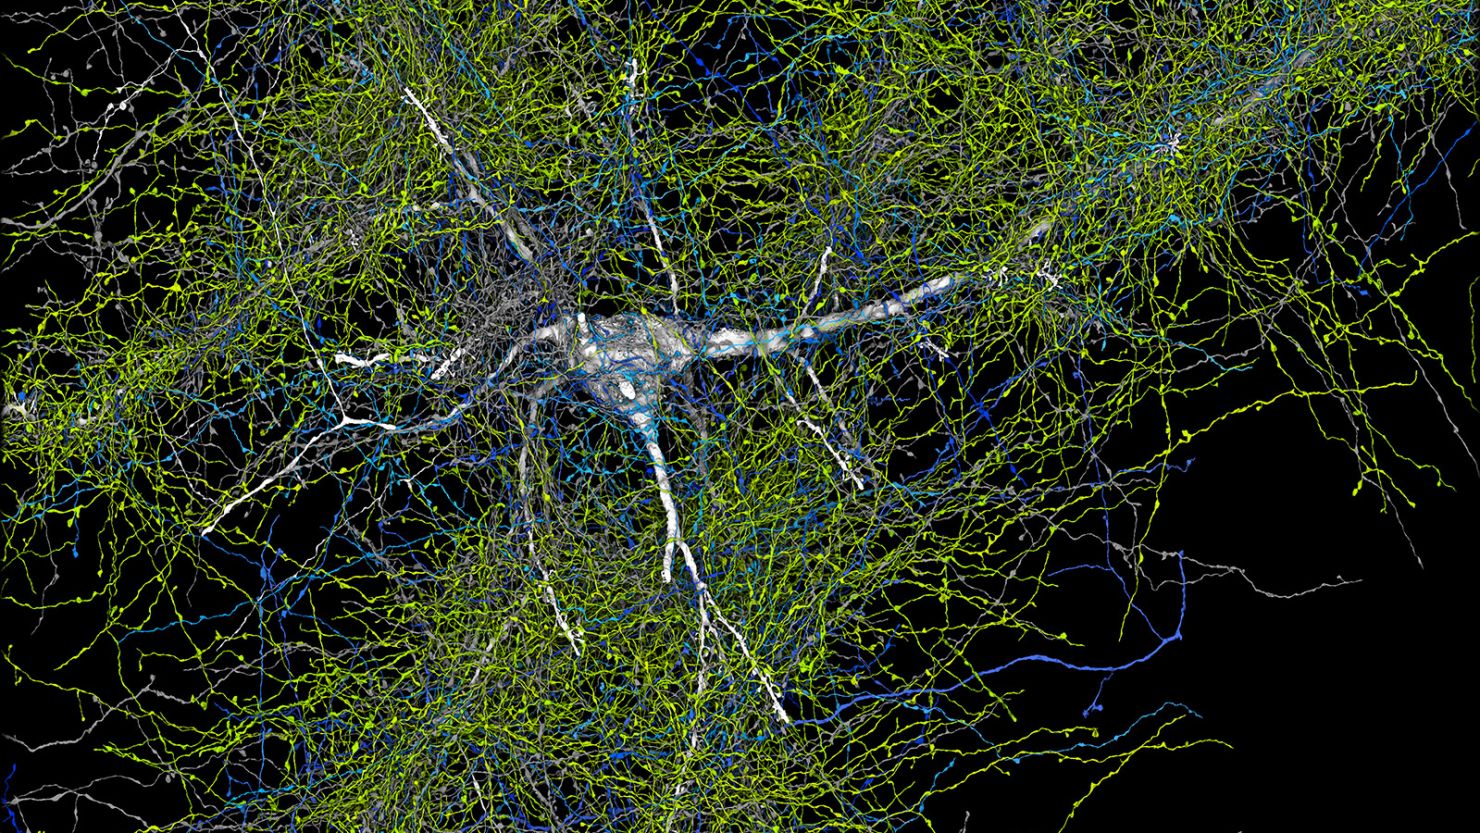 This image displays a single human neuron (white) and all of the axons from other neurons that connect to it. The blue threads are inhibitory axons, while the green ones are excitatory axons. Neurons are the cellular building blocks of the nervous system.